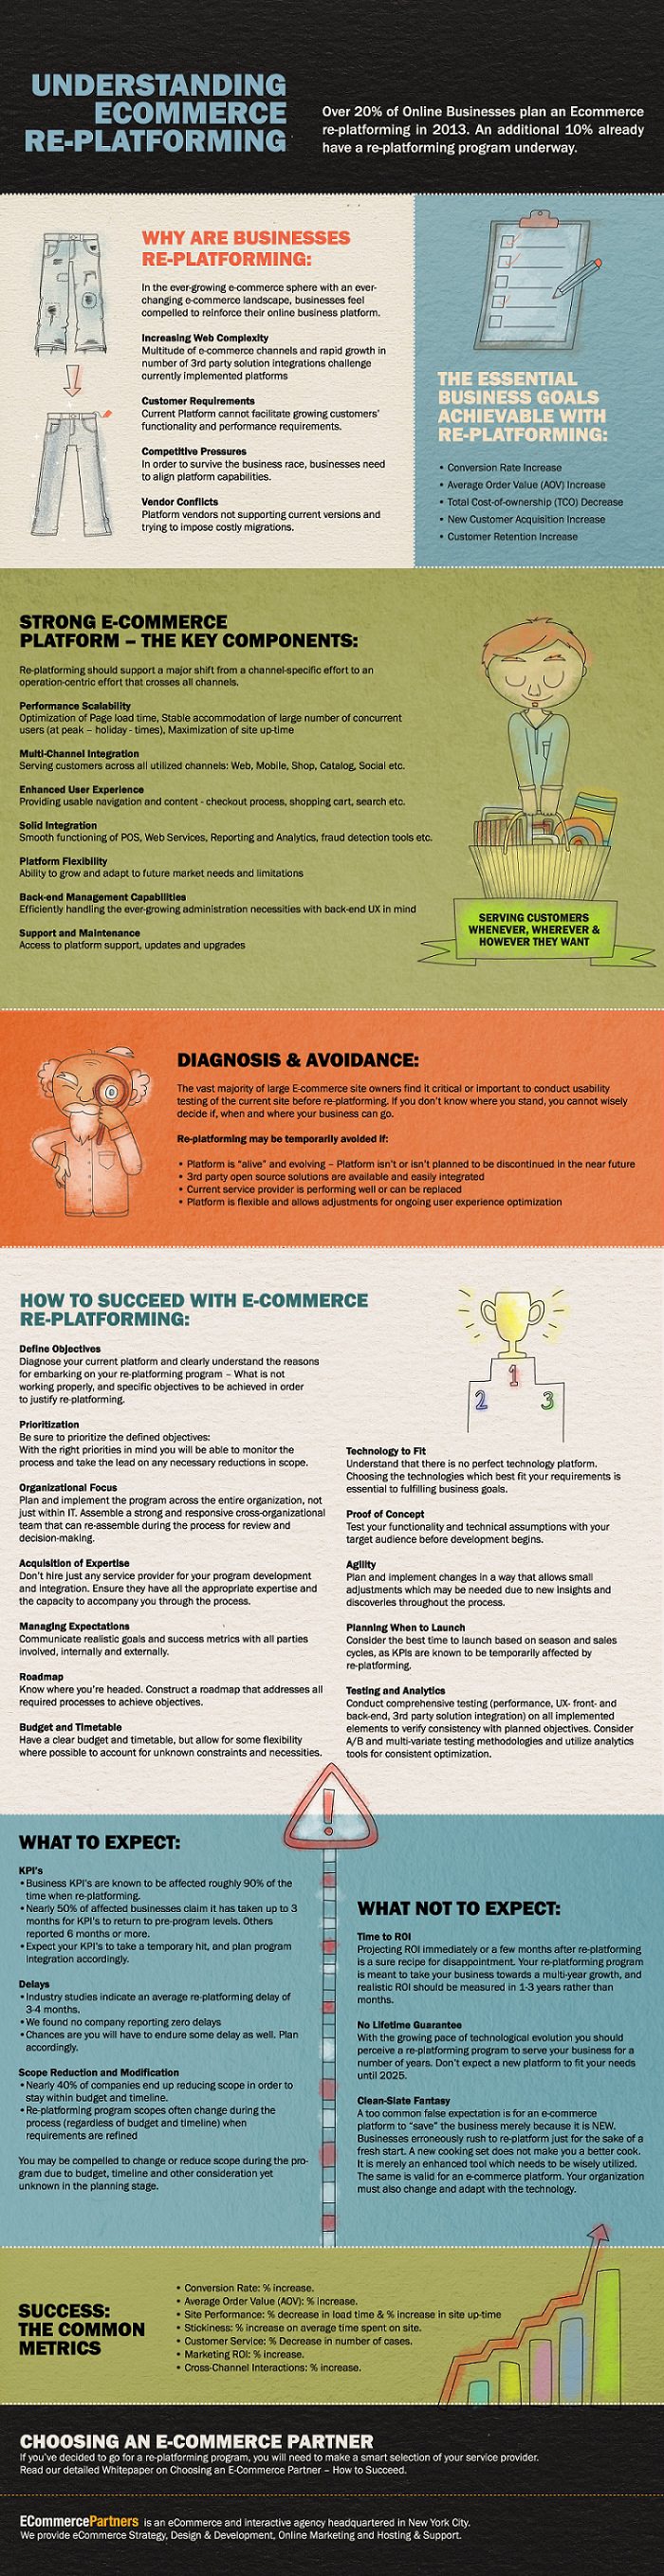 Roadmap for Successful eCommerce Re-platforming [Infographic]